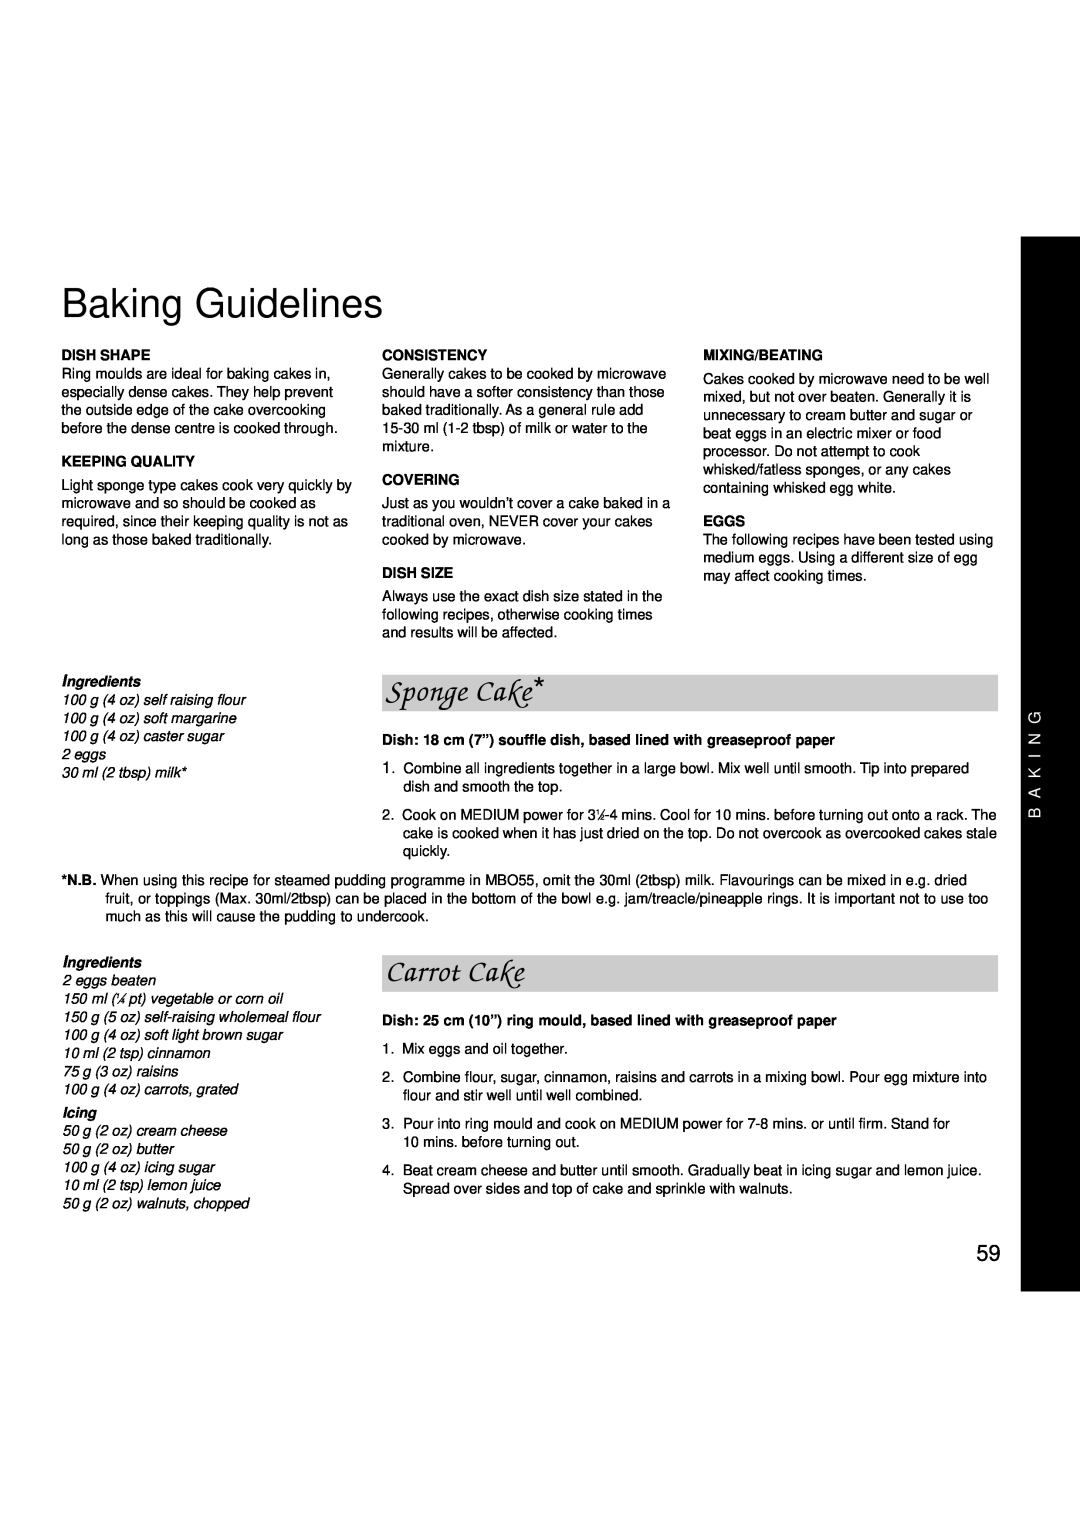 Creda MBO55 Baking Guidelines, Sponge Cake, Carrot Cake, B A K I N G, Dish Shape, Keeping Quality, Consistency, Covering 